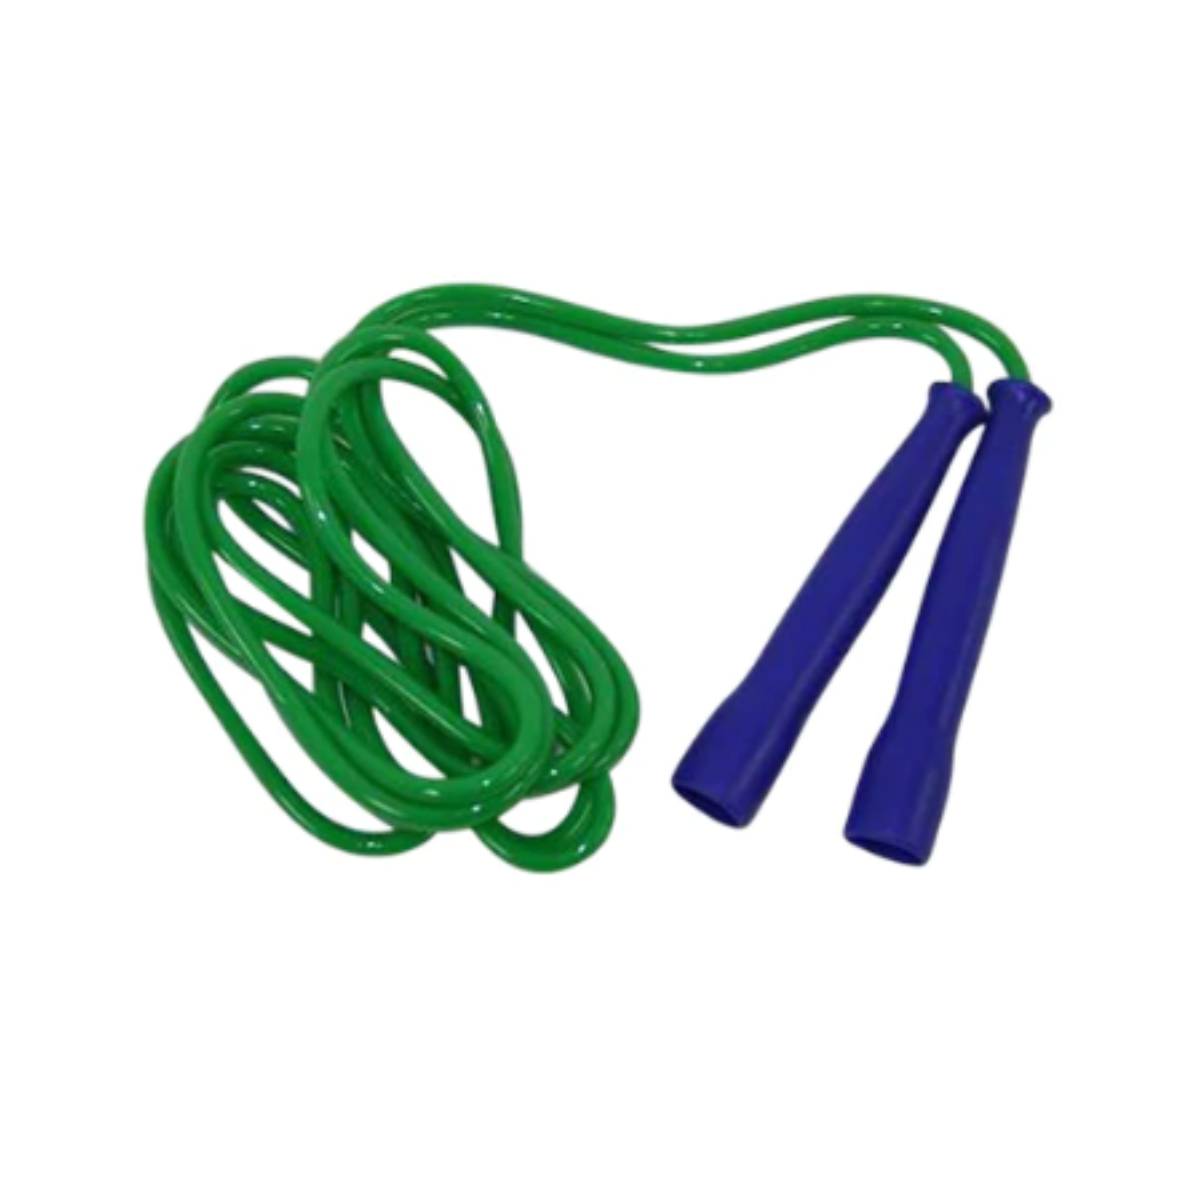 Stretchwell 10' Speed Jump Rope